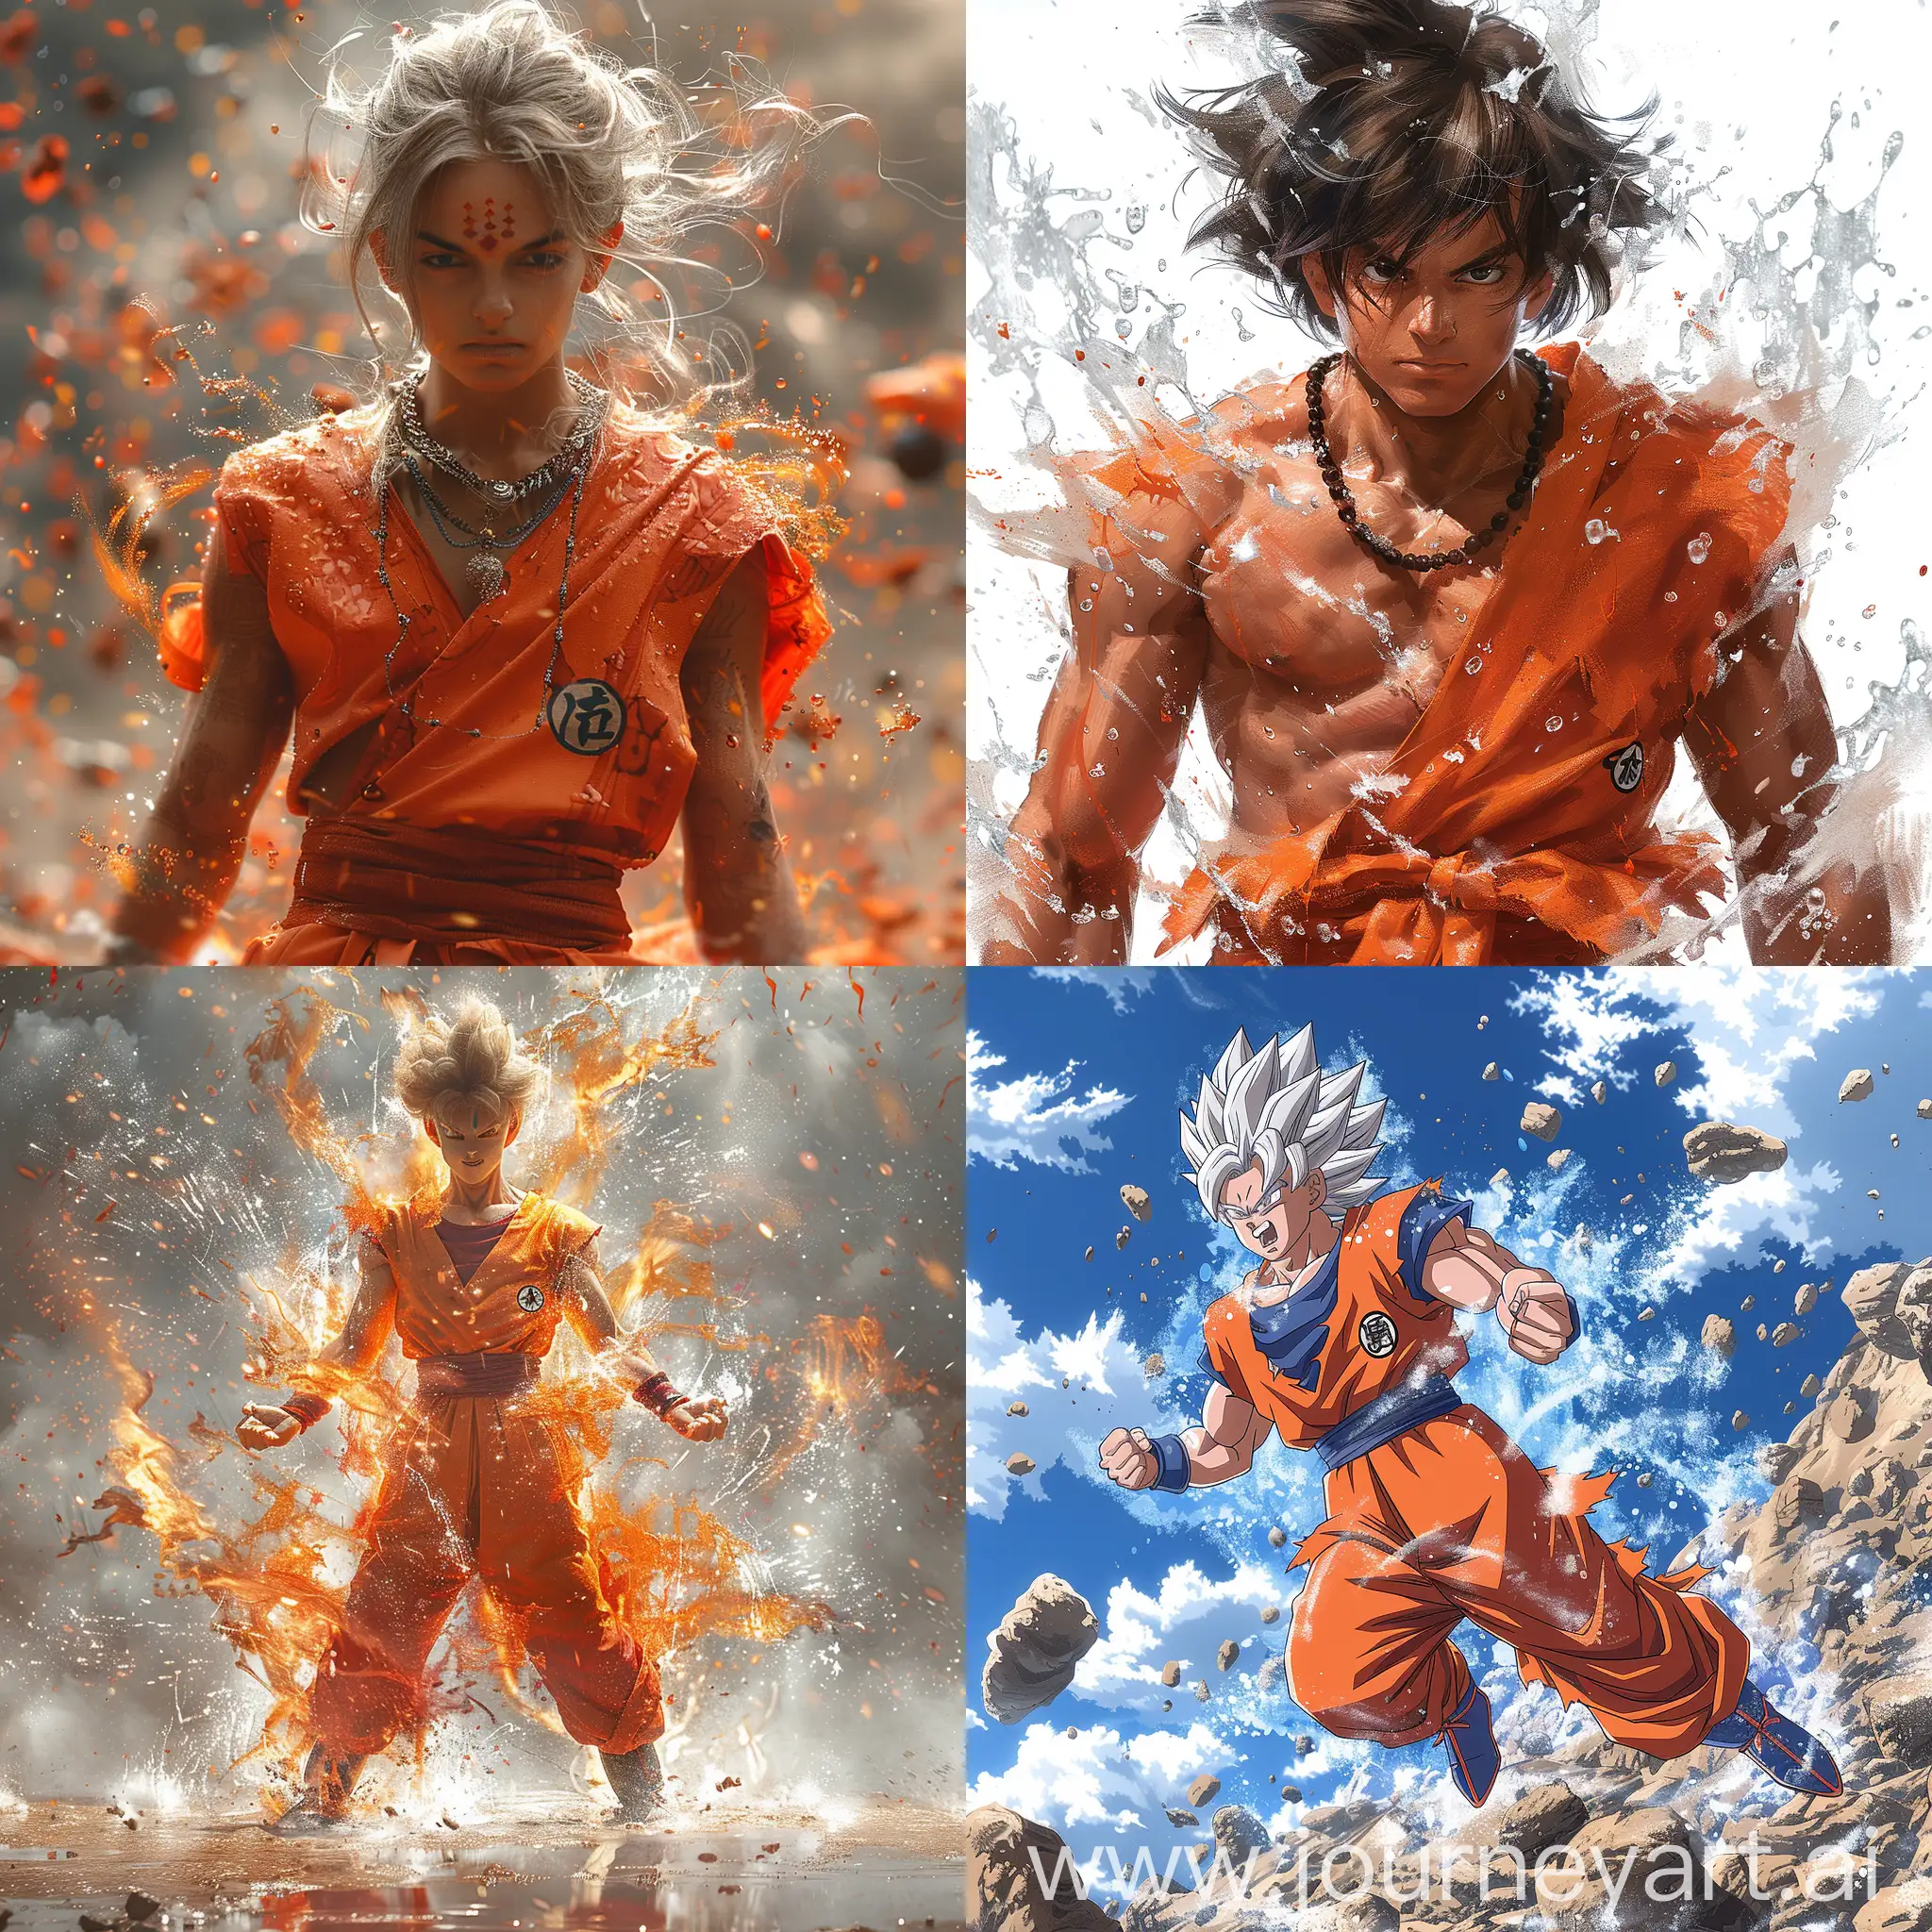 Ultra Instinct Goku as an Indian, dynamic power stance, ethereal aura, wearing his orange outfit, action- packed pose, aiming for the highest level of aesthetic excellence worthy of an Oscar award, perfect --ar 1:1 --s 750 --c 15 --v 6